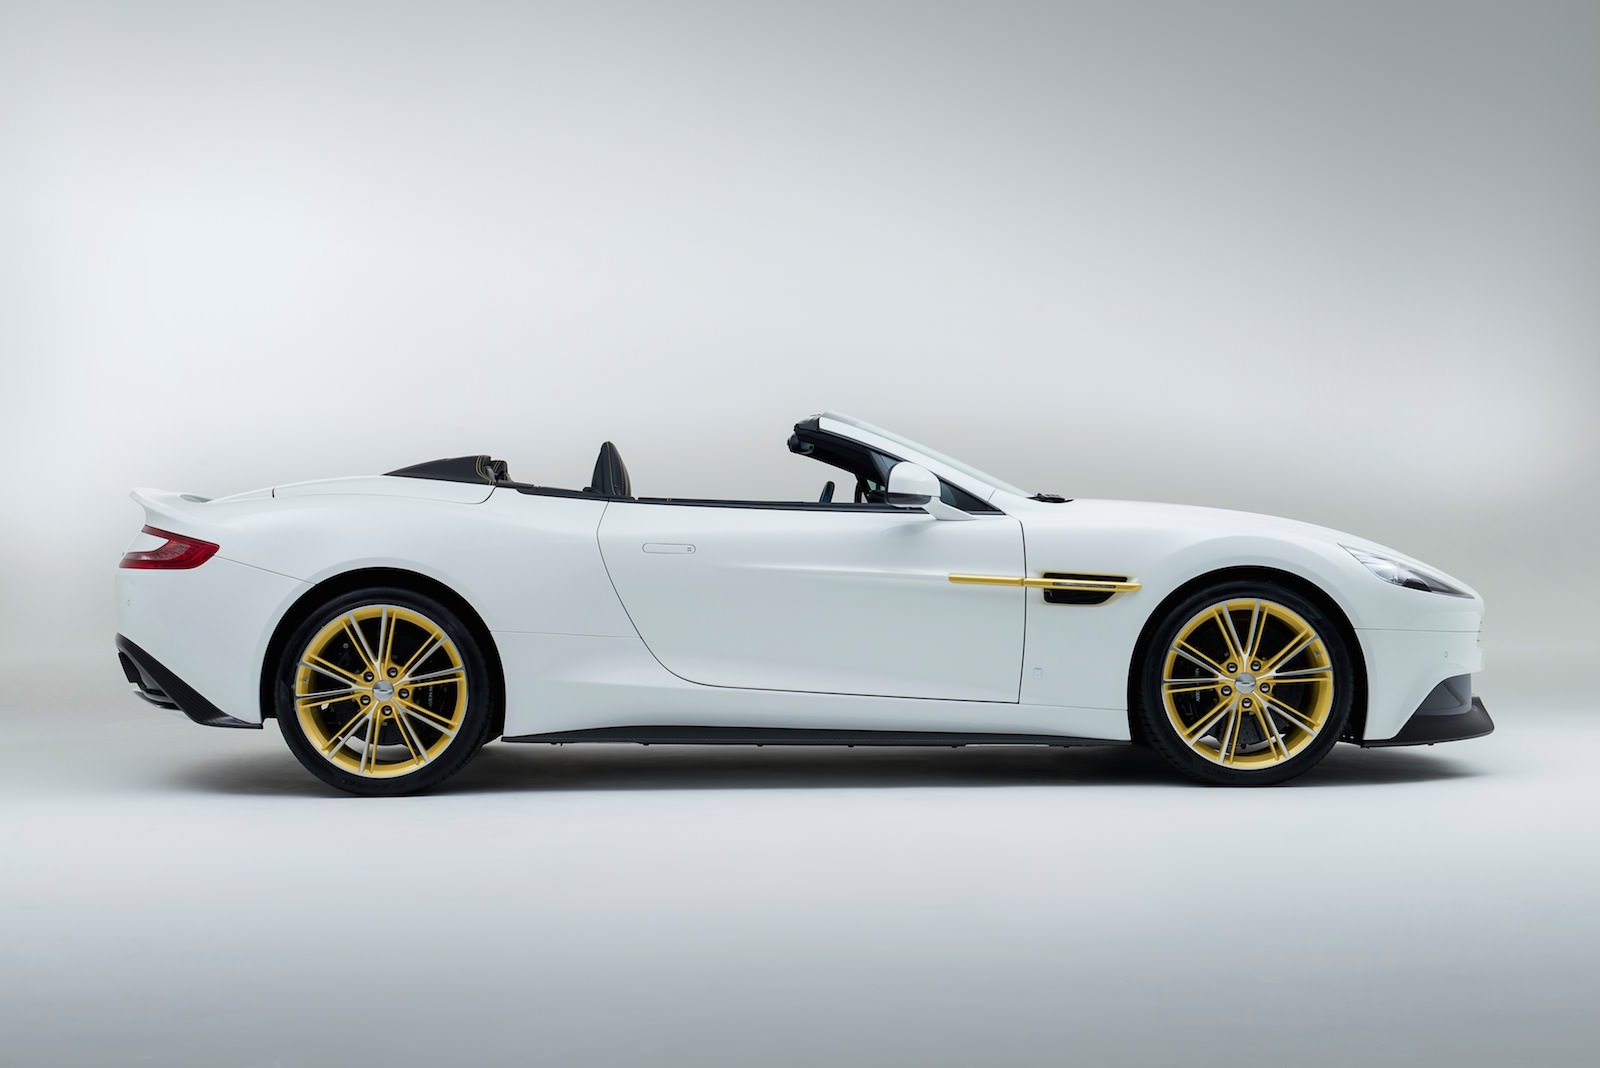 Aston Martin and the 60th anniversary limited edition Vanquish